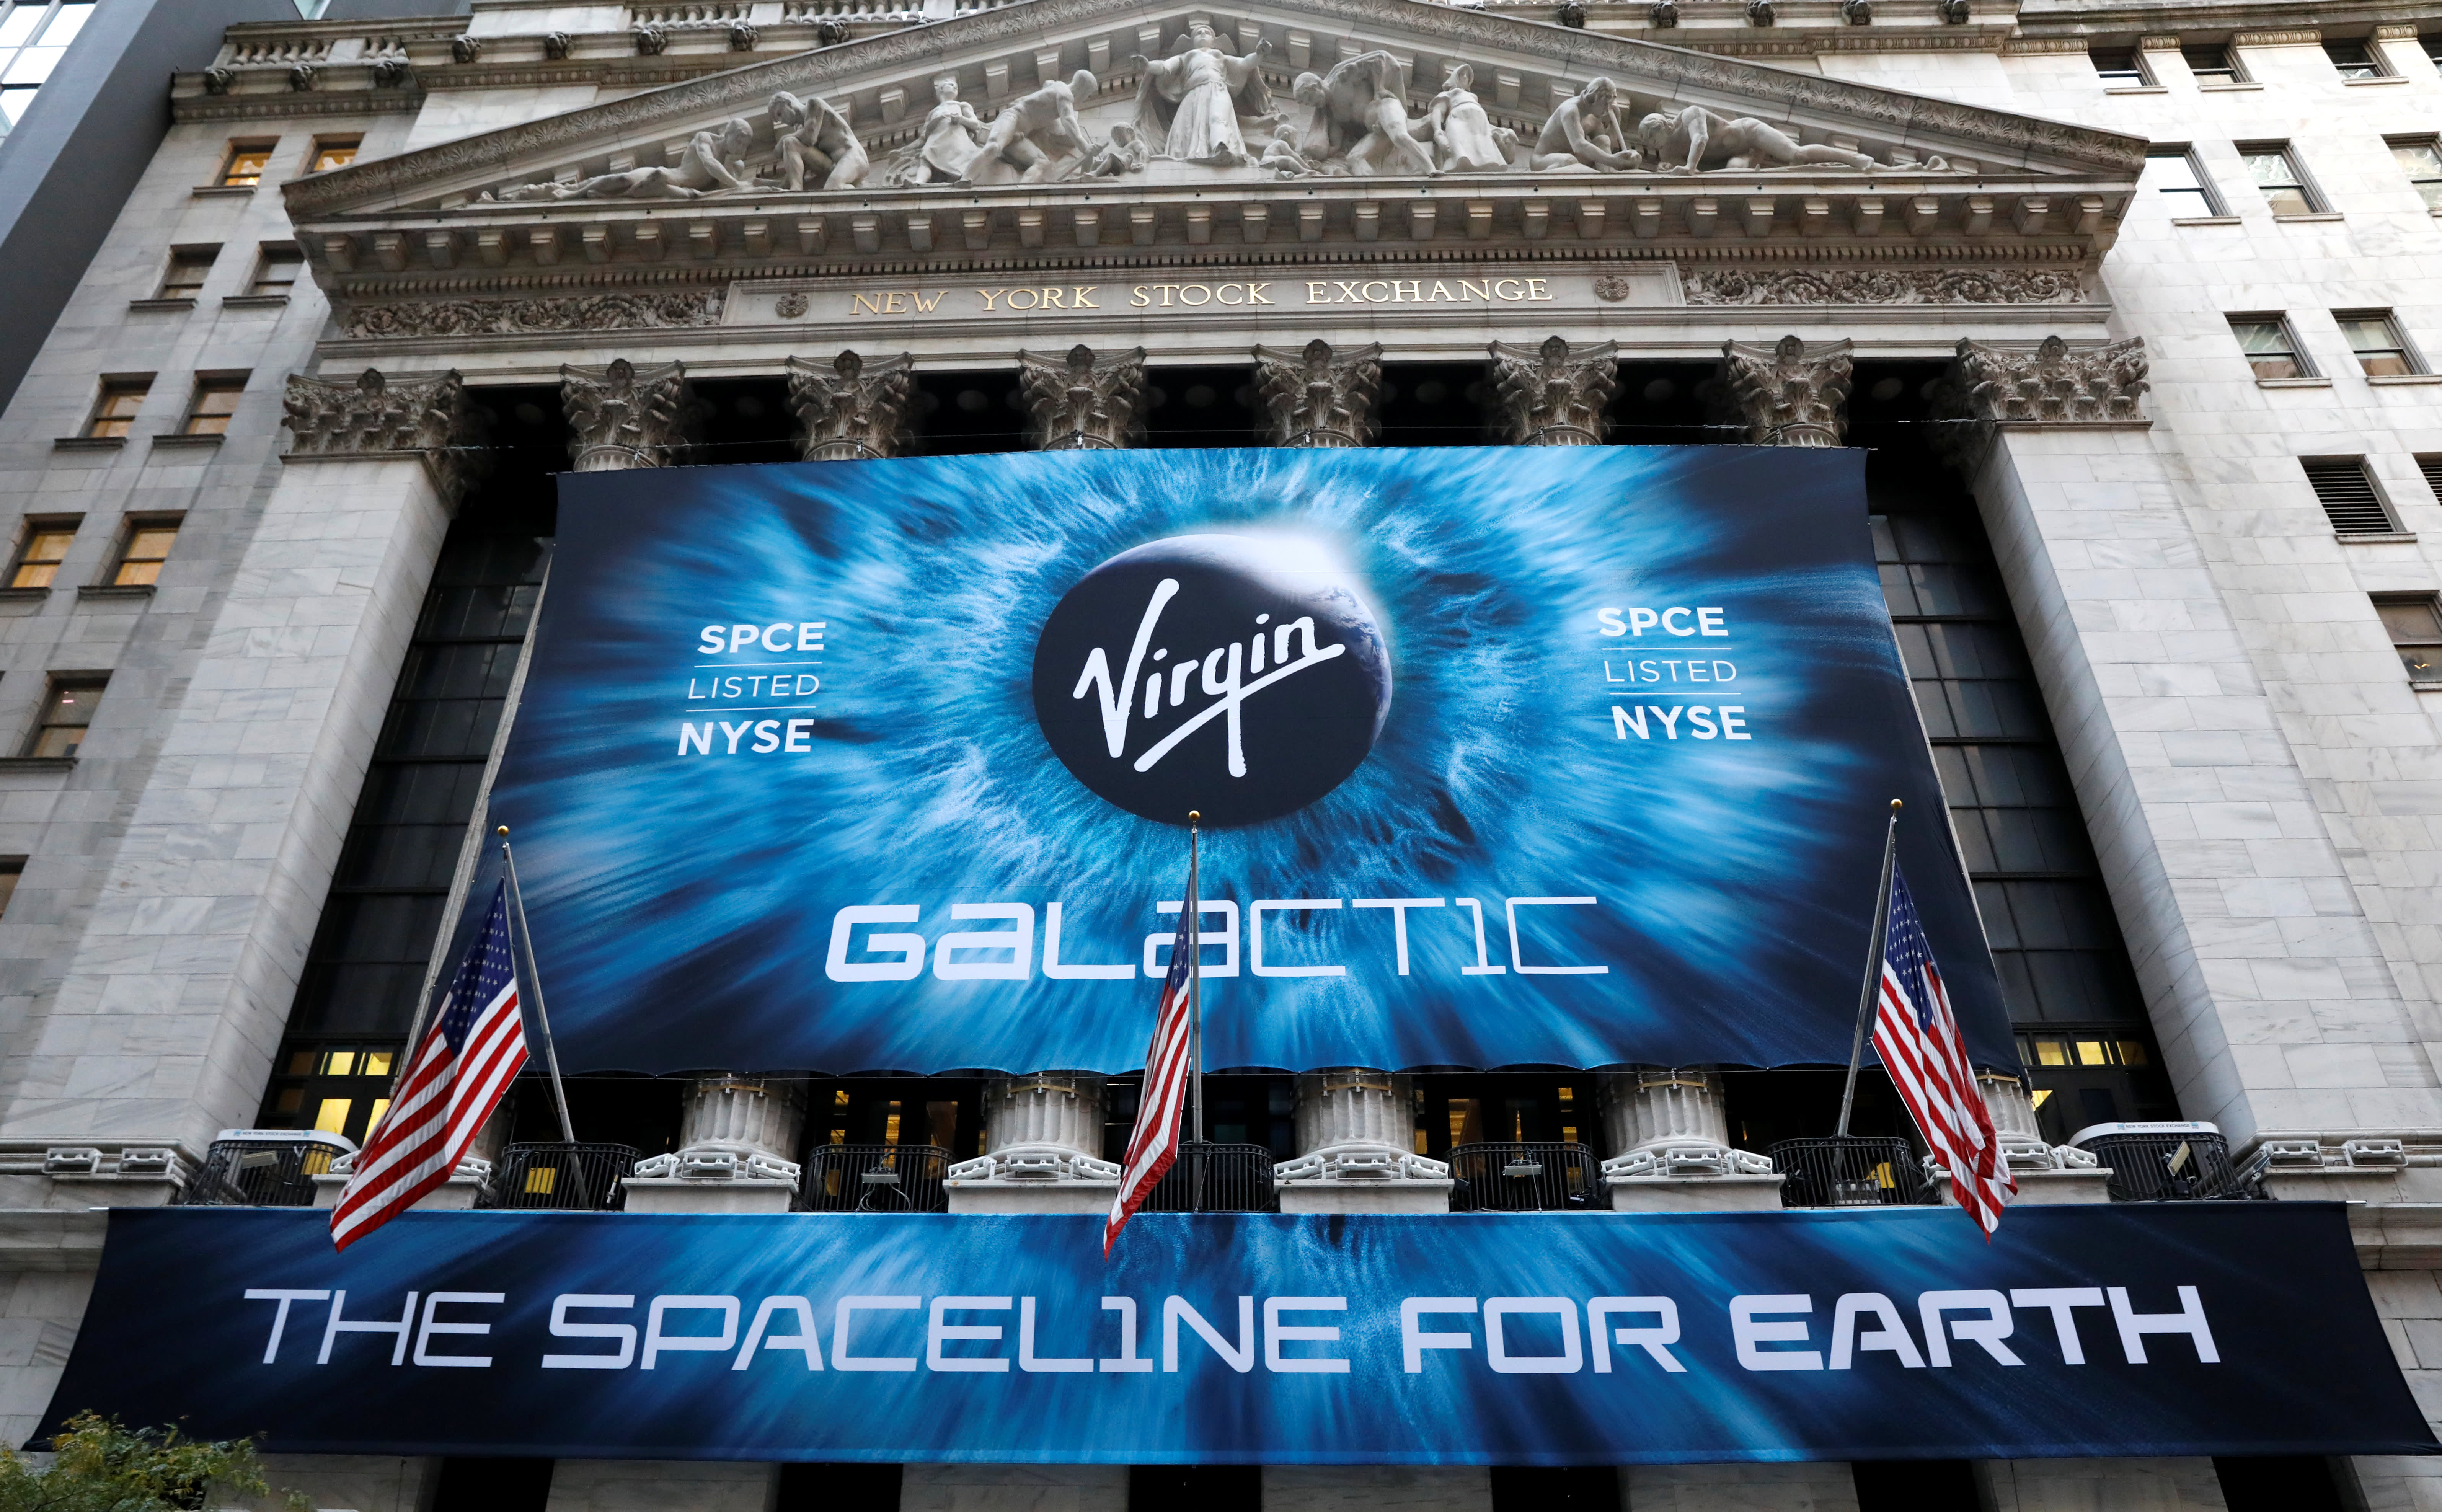 Virgin Galactic SPCE earnings in the fourth quarter of 2020